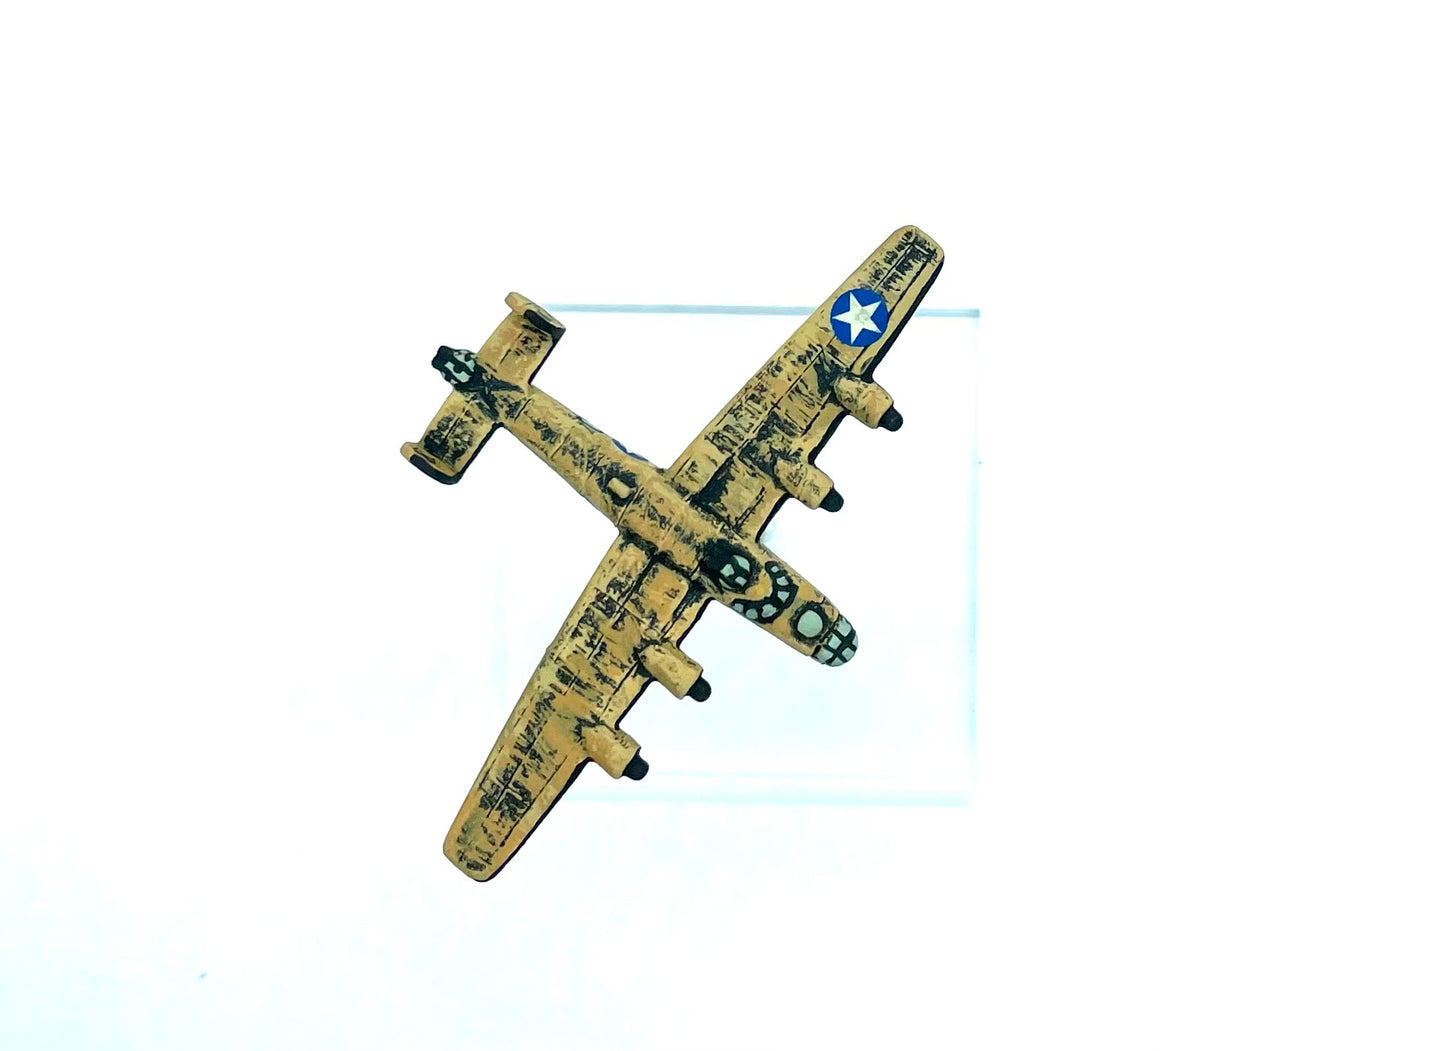 ISA281a B24d Consolidated Liberator x2